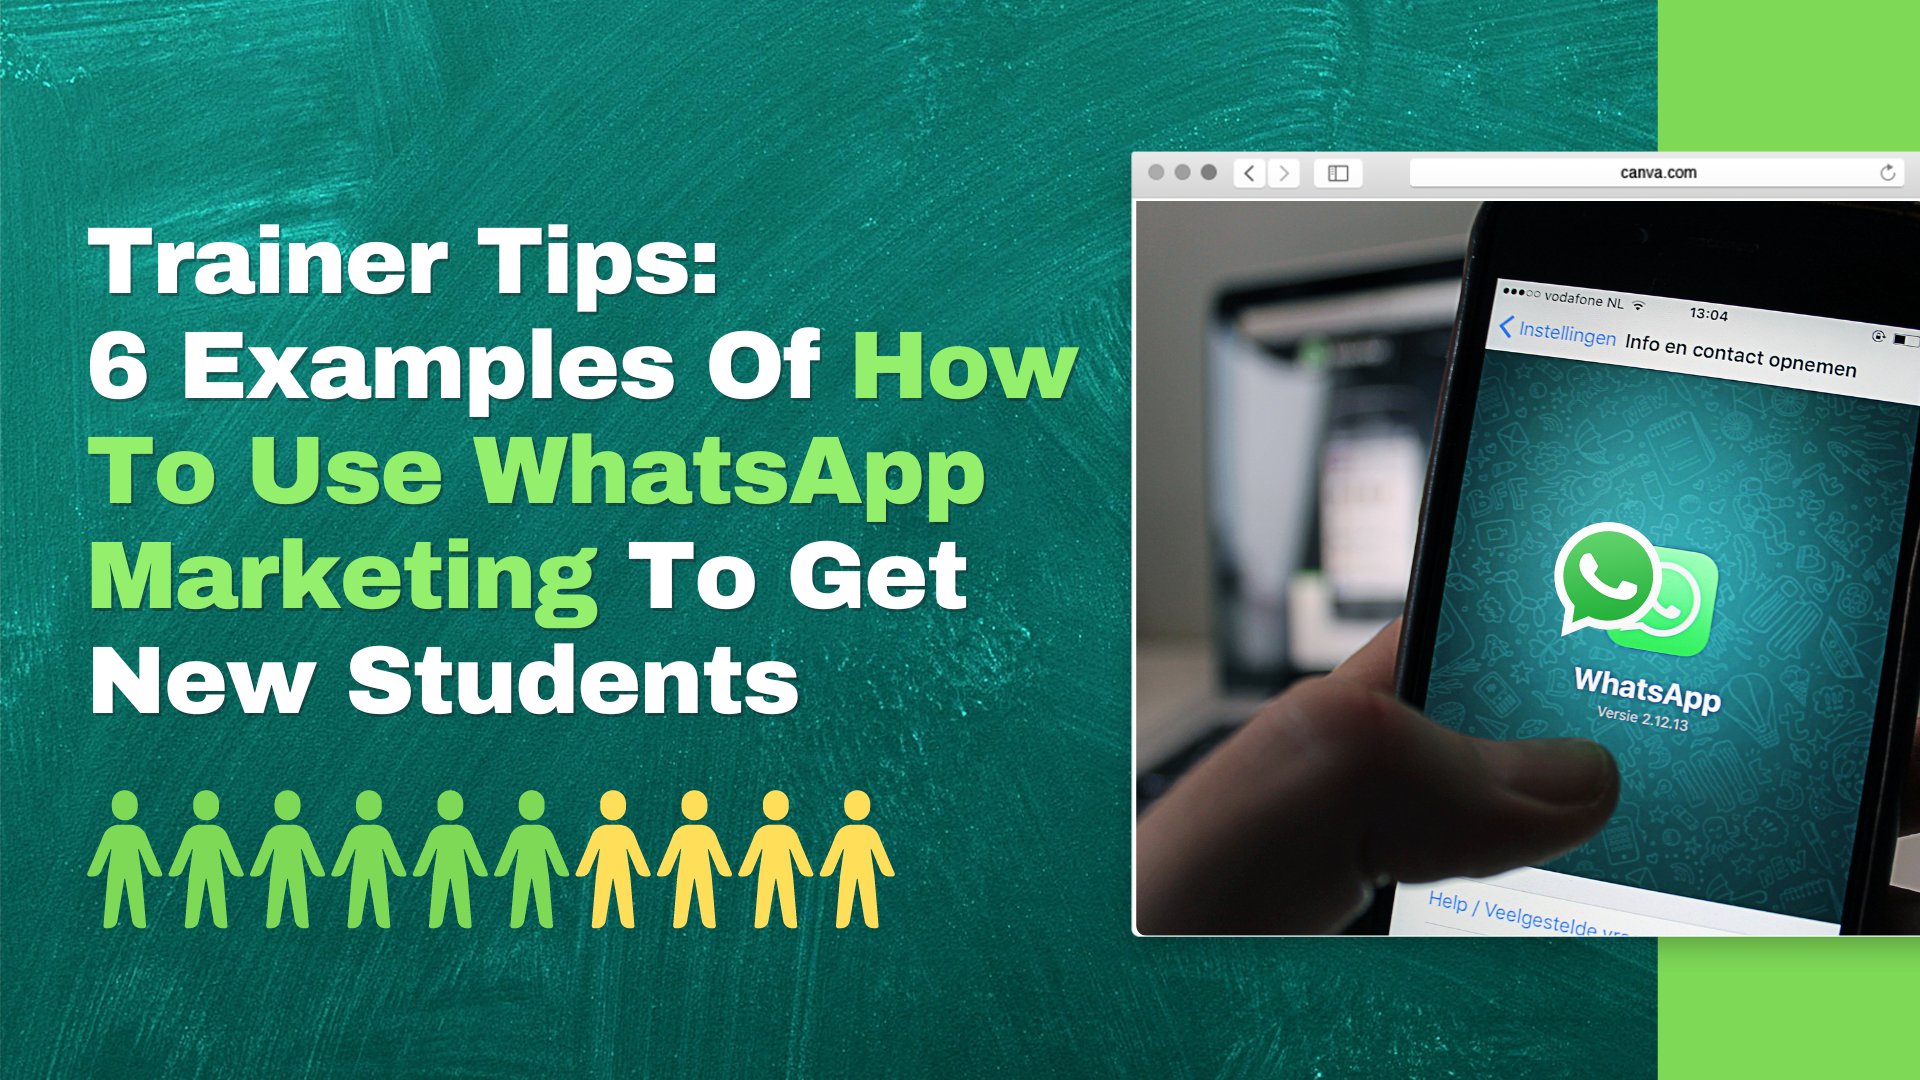 Trainer Tips: 6 Examples Of How To Use WhatsApp Marketing To Get New Students